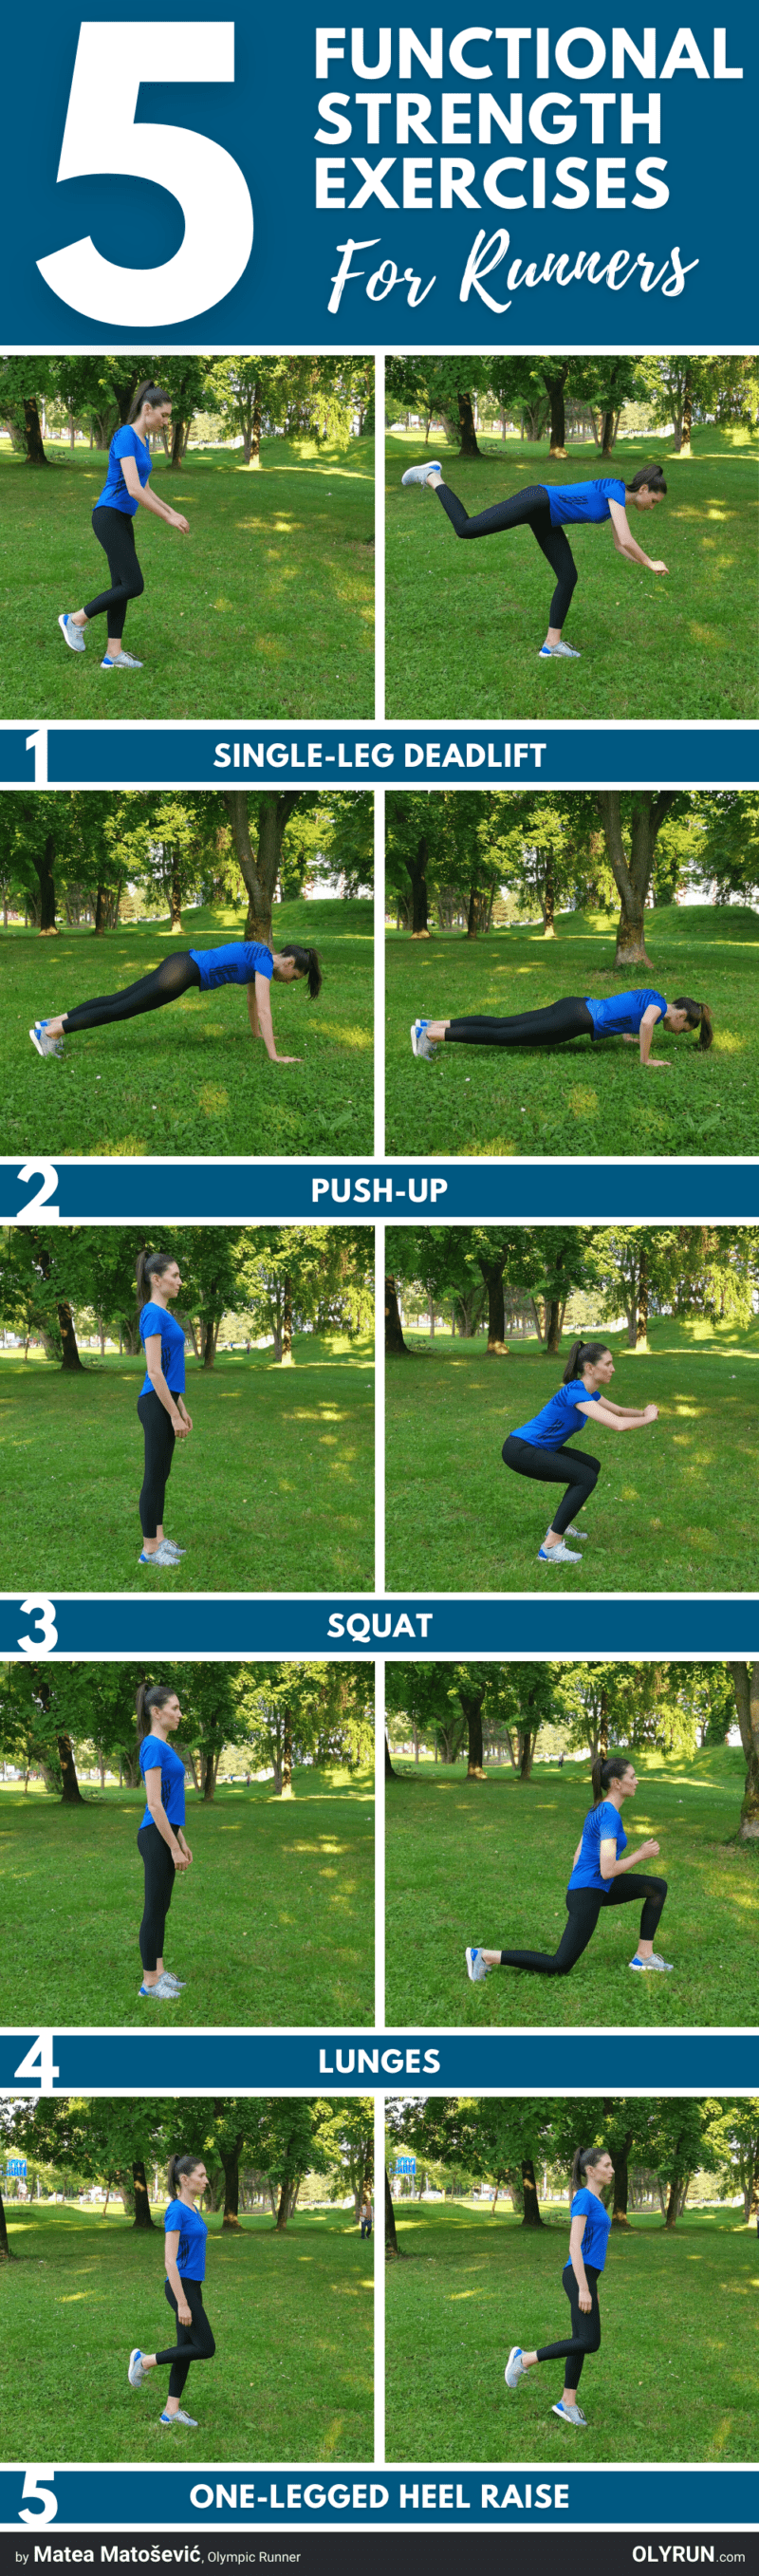 functional strength training workout for runners